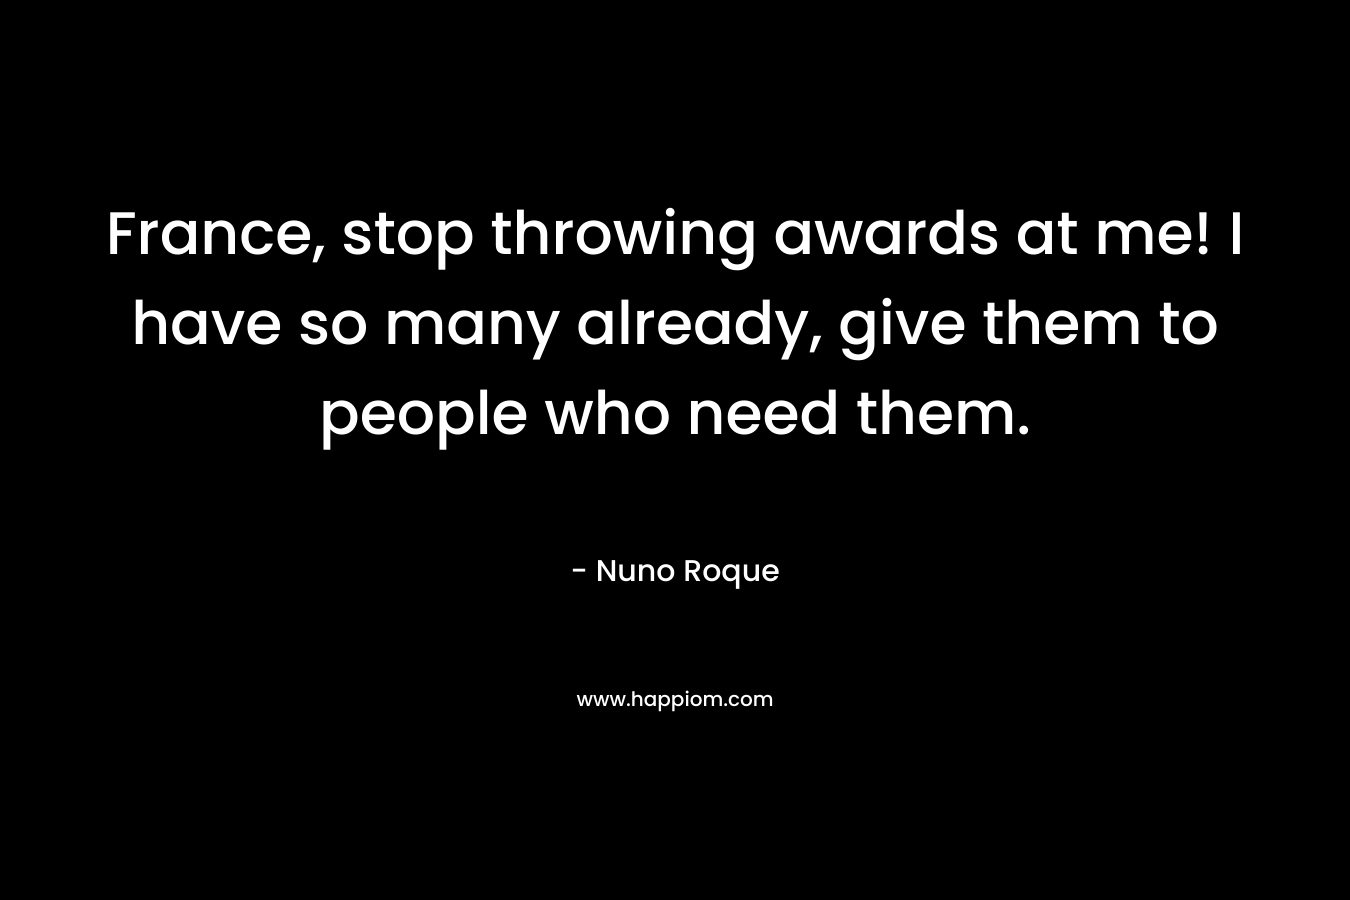 France, stop throwing awards at me! I have so many already, give them to people who need them. – Nuno Roque